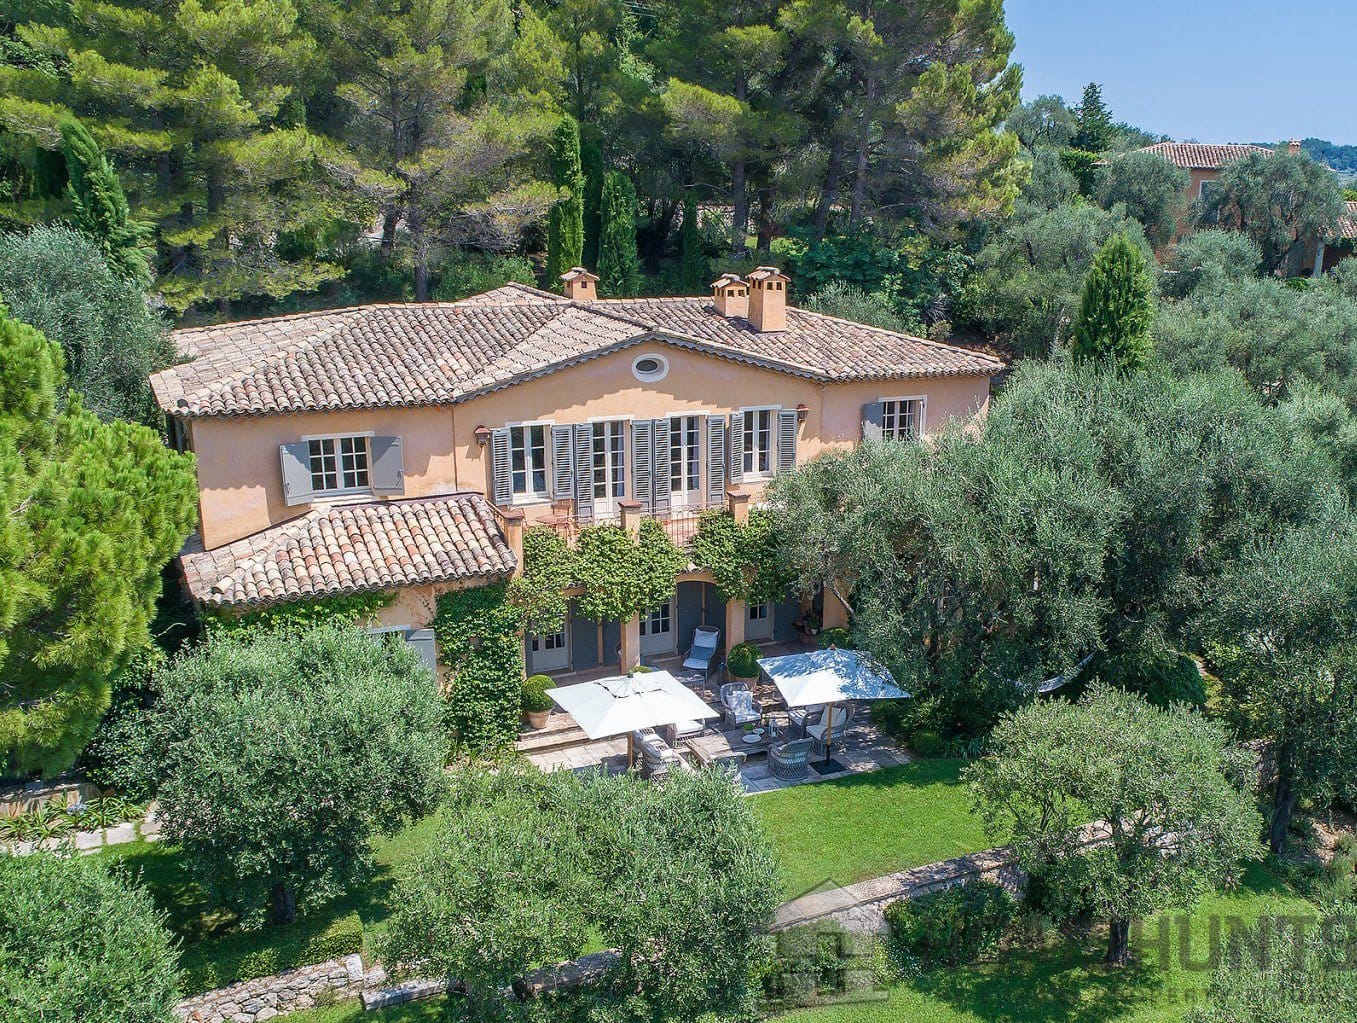 12 Bedroom Castle/Estates in Chateauneuf Grasse 7